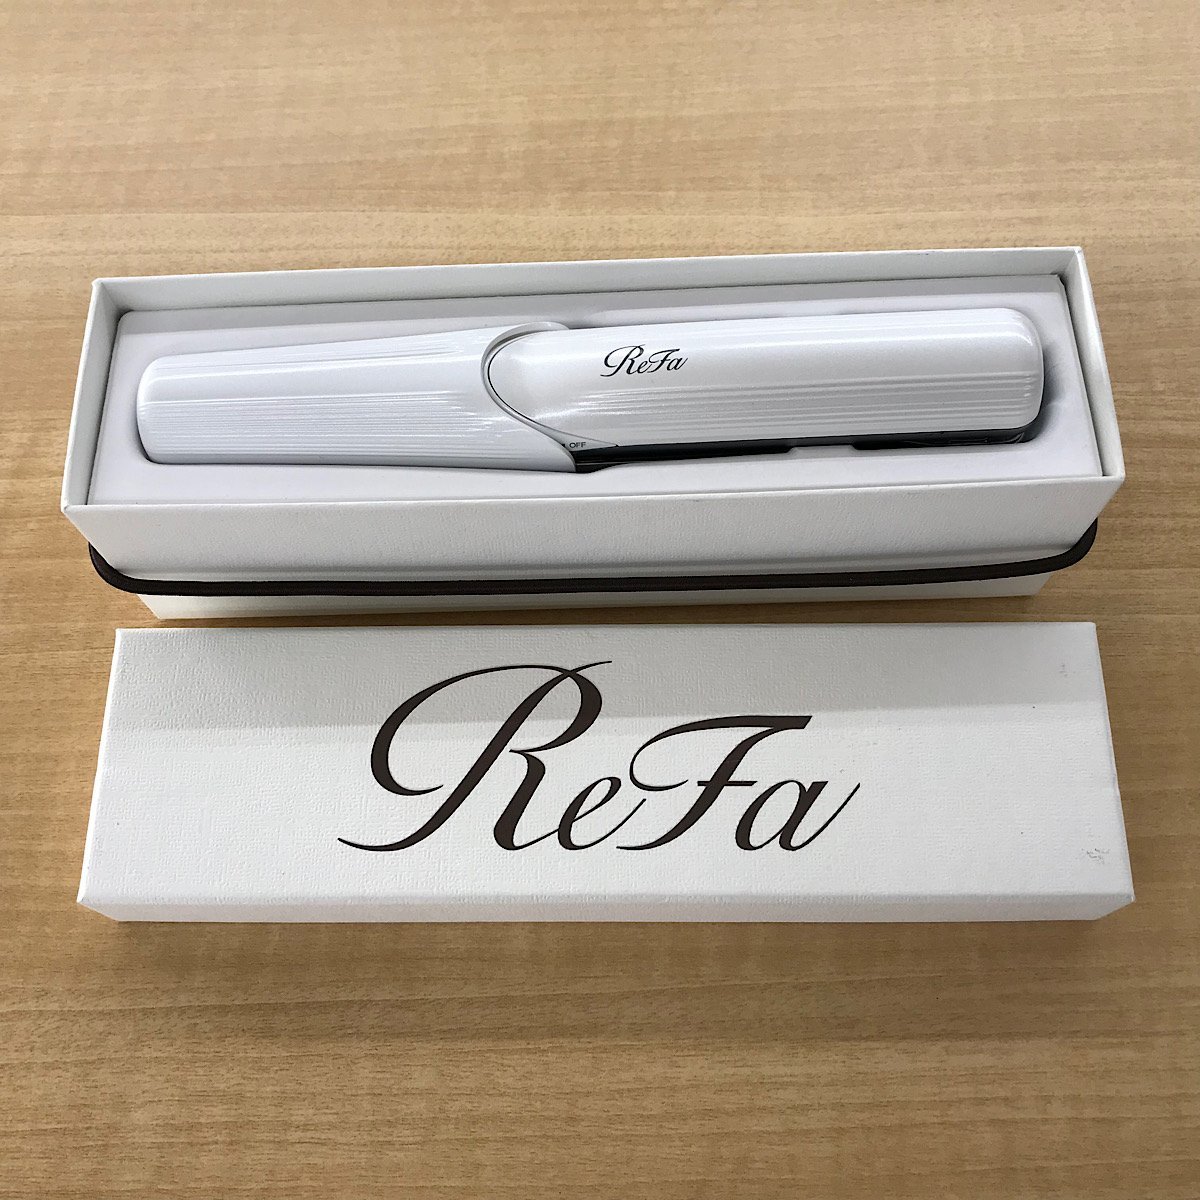 『USED』 ReFa RE-A102A フィンガーアイロン 小型家電